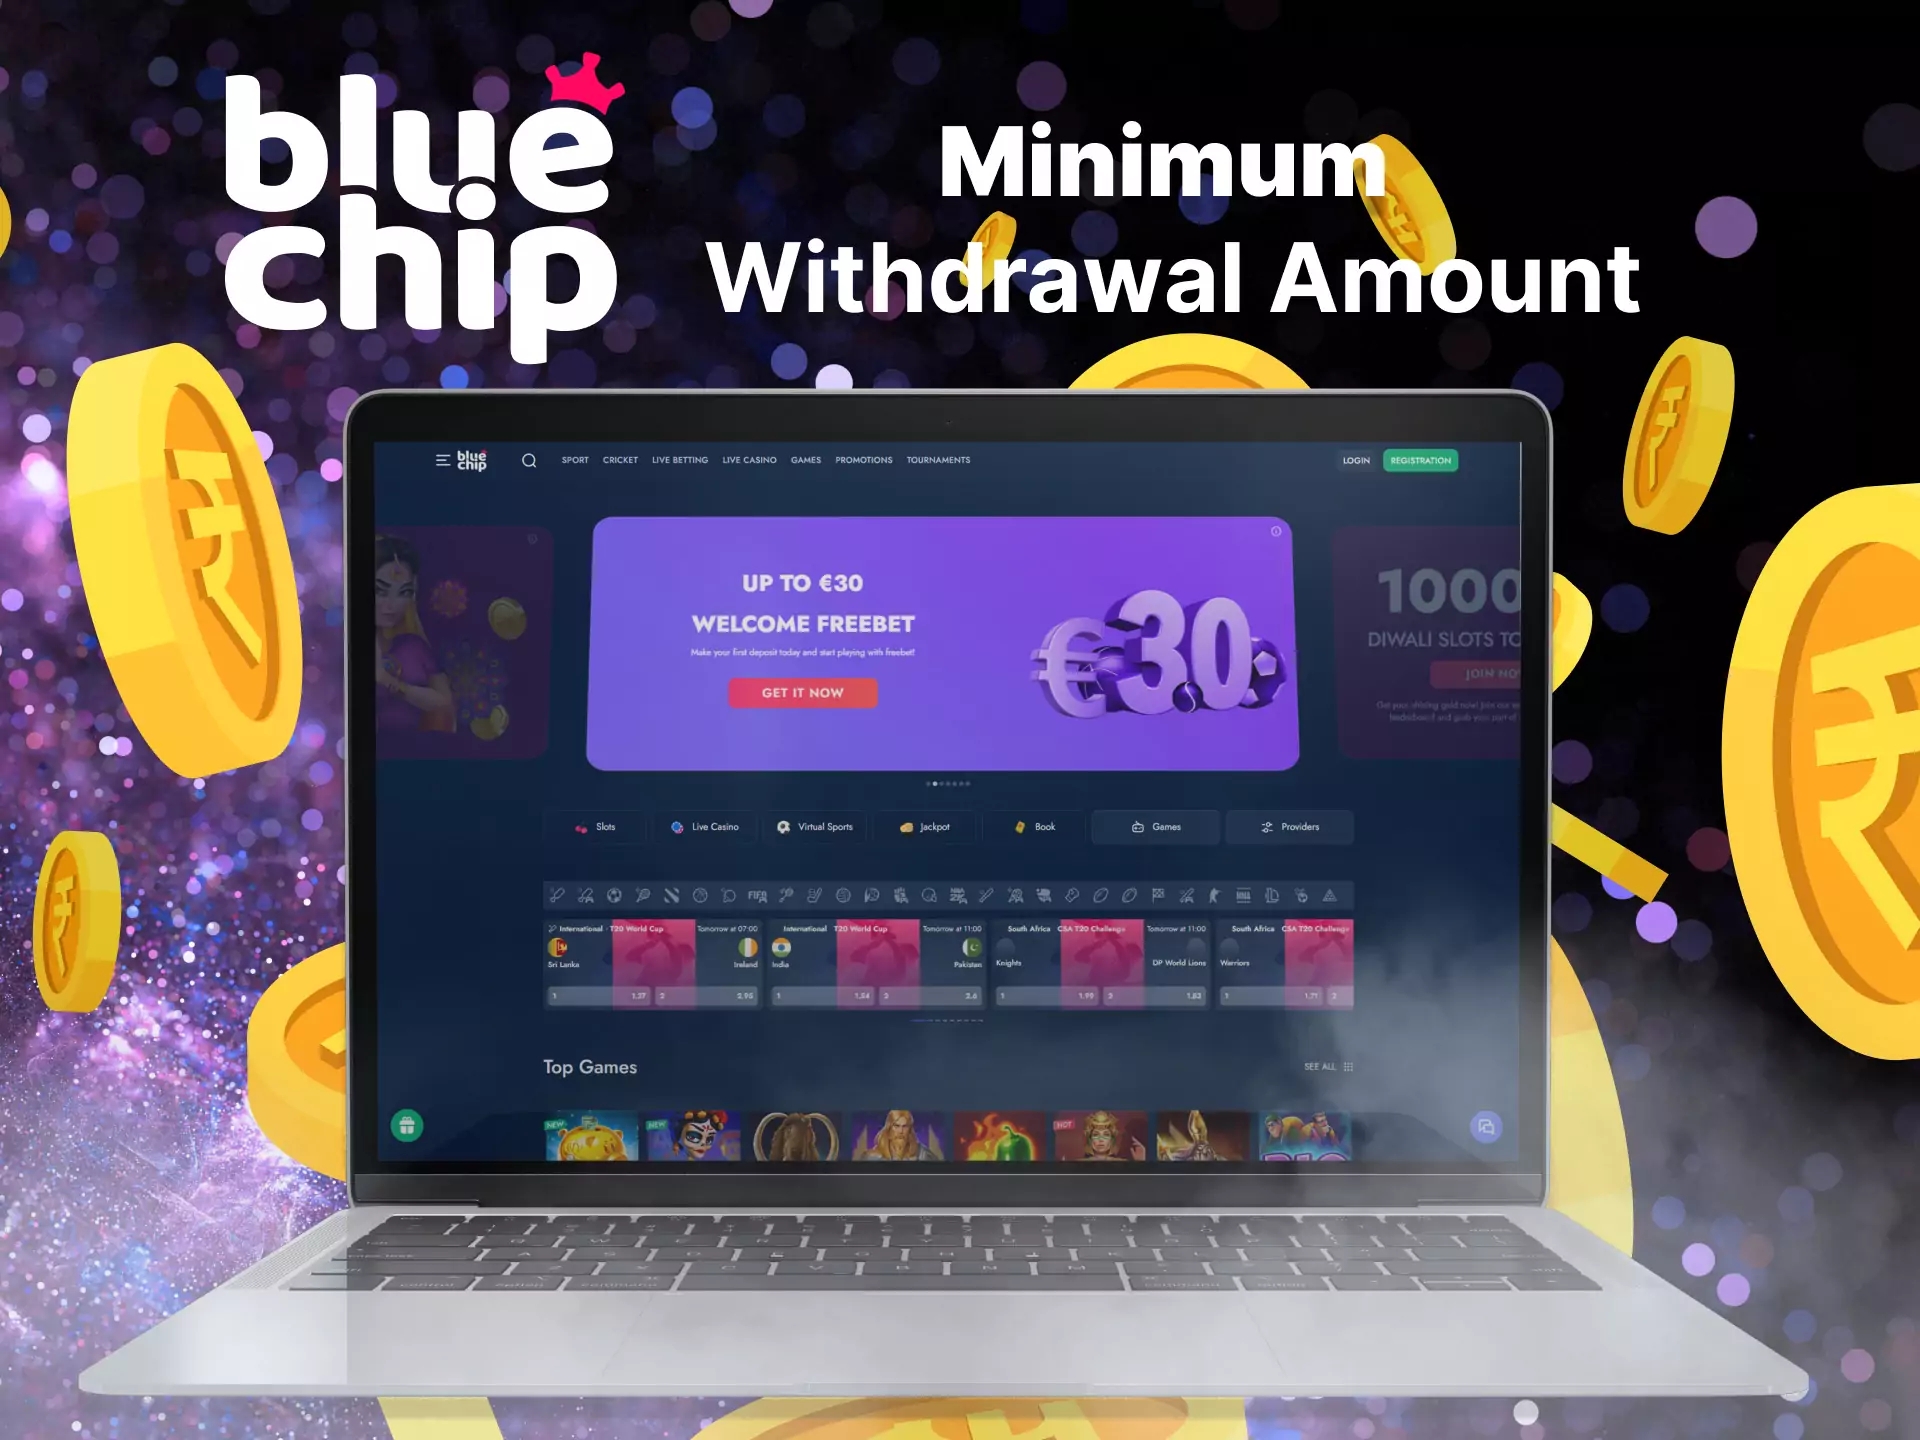 Find out the minimum withdrawal limit of Bluechip funds.